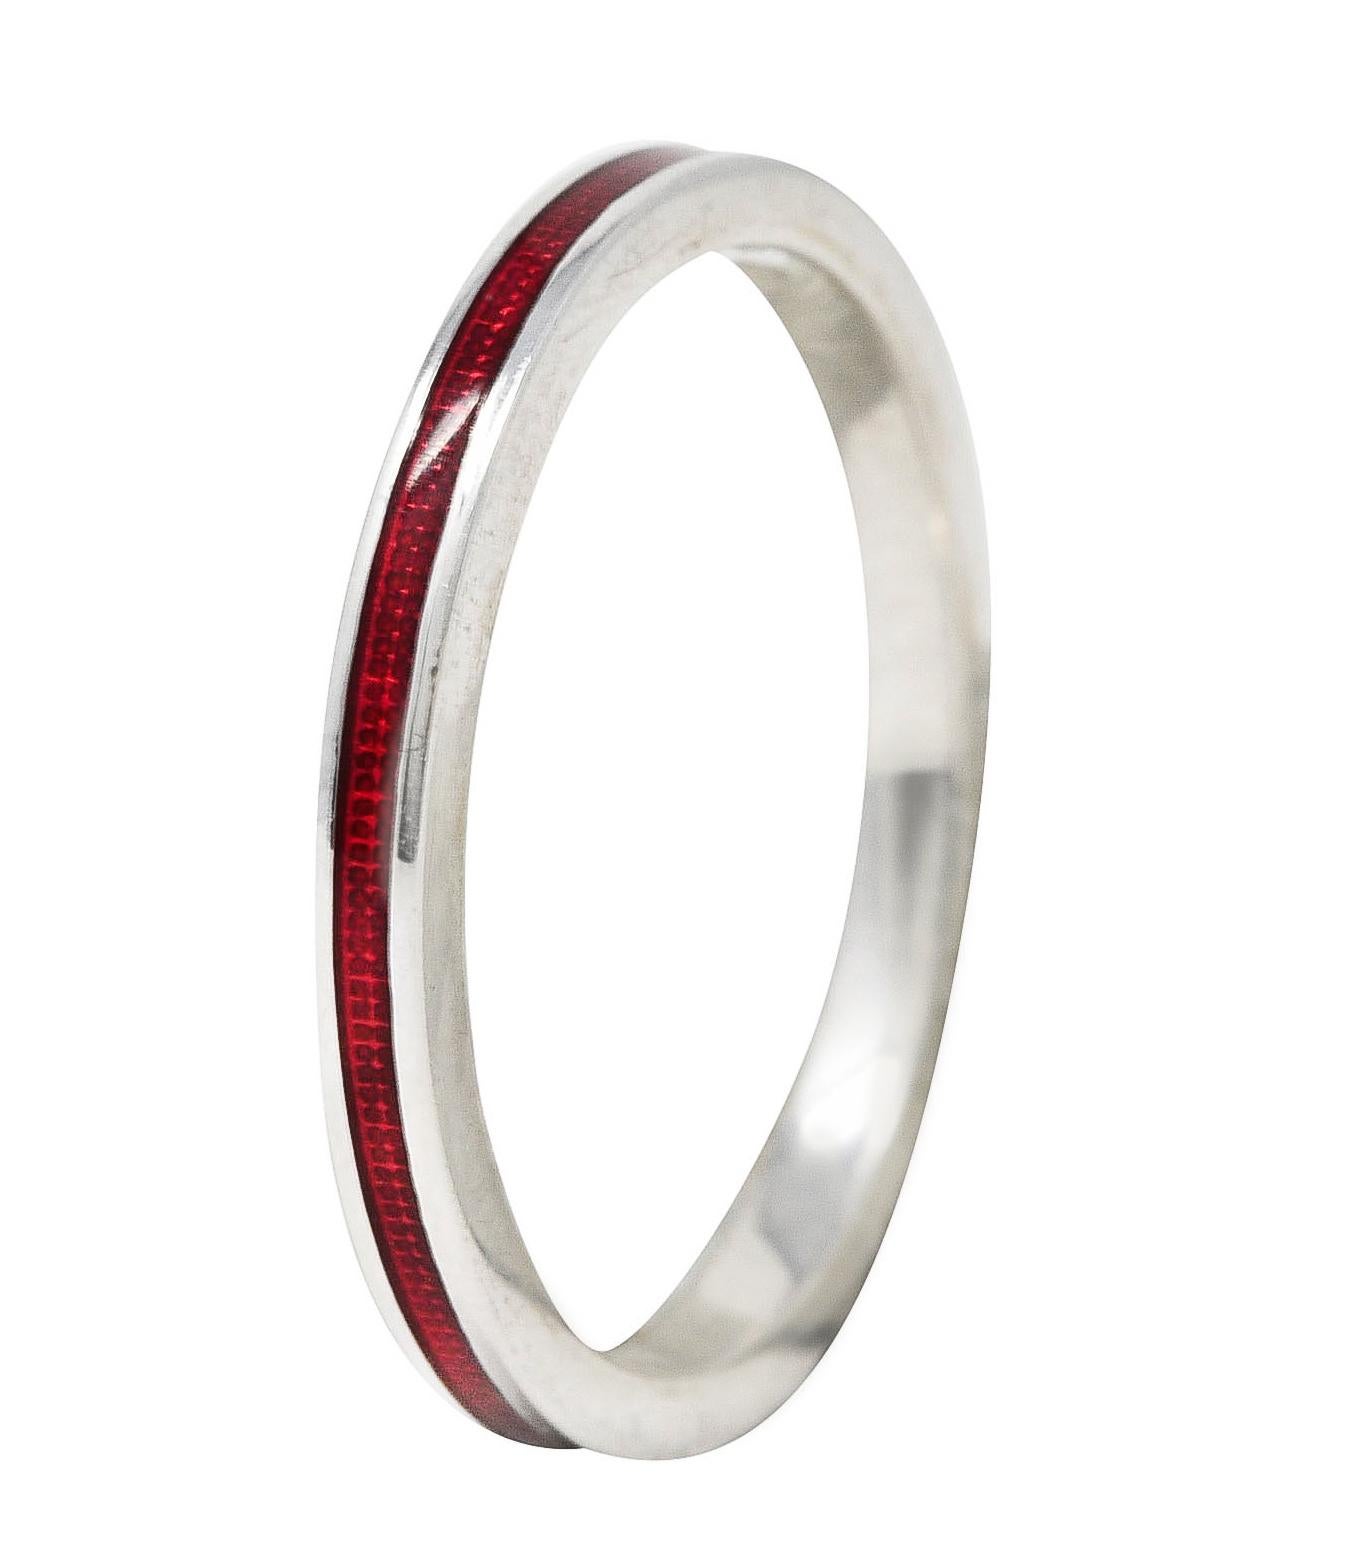 Band ring features a recessed guilloche enamel channel fully around. Glossy and transparent medium red in color over engraved linear pattern. With high polished gold surround. Stamped 750 for 18 karat gold. Signed with maker's mark for Hidalgo.